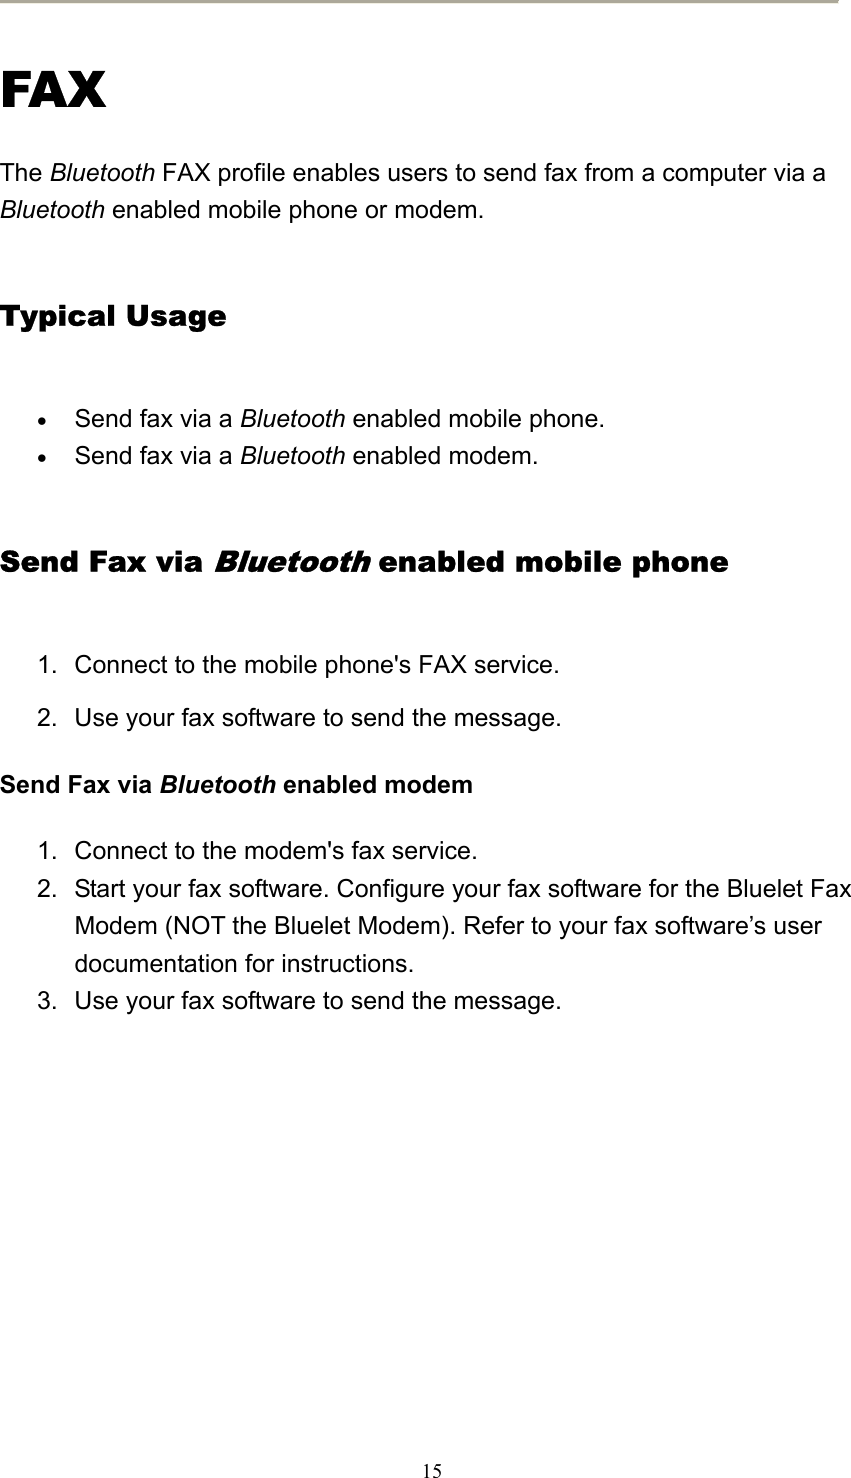   15 FAX The Bluetooth FAX profile enables users to send fax from a computer via a Bluetooth enabled mobile phone or modem.   Typical Usage • Send fax via a Bluetooth enabled mobile phone.   • Send fax via a Bluetooth enabled modem.   Send Fax via Bluetooth enabled mobile phone 1.  Connect to the mobile phone&apos;s FAX service.   2.  Use your fax software to send the message.   Send Fax via Bluetooth enabled modem 1.  Connect to the modem&apos;s fax service.   2.  Start your fax software. Configure your fax software for the Bluelet Fax Modem (NOT the Bluelet Modem). Refer to your fax software’s user documentation for instructions.   3.  Use your fax software to send the message.         